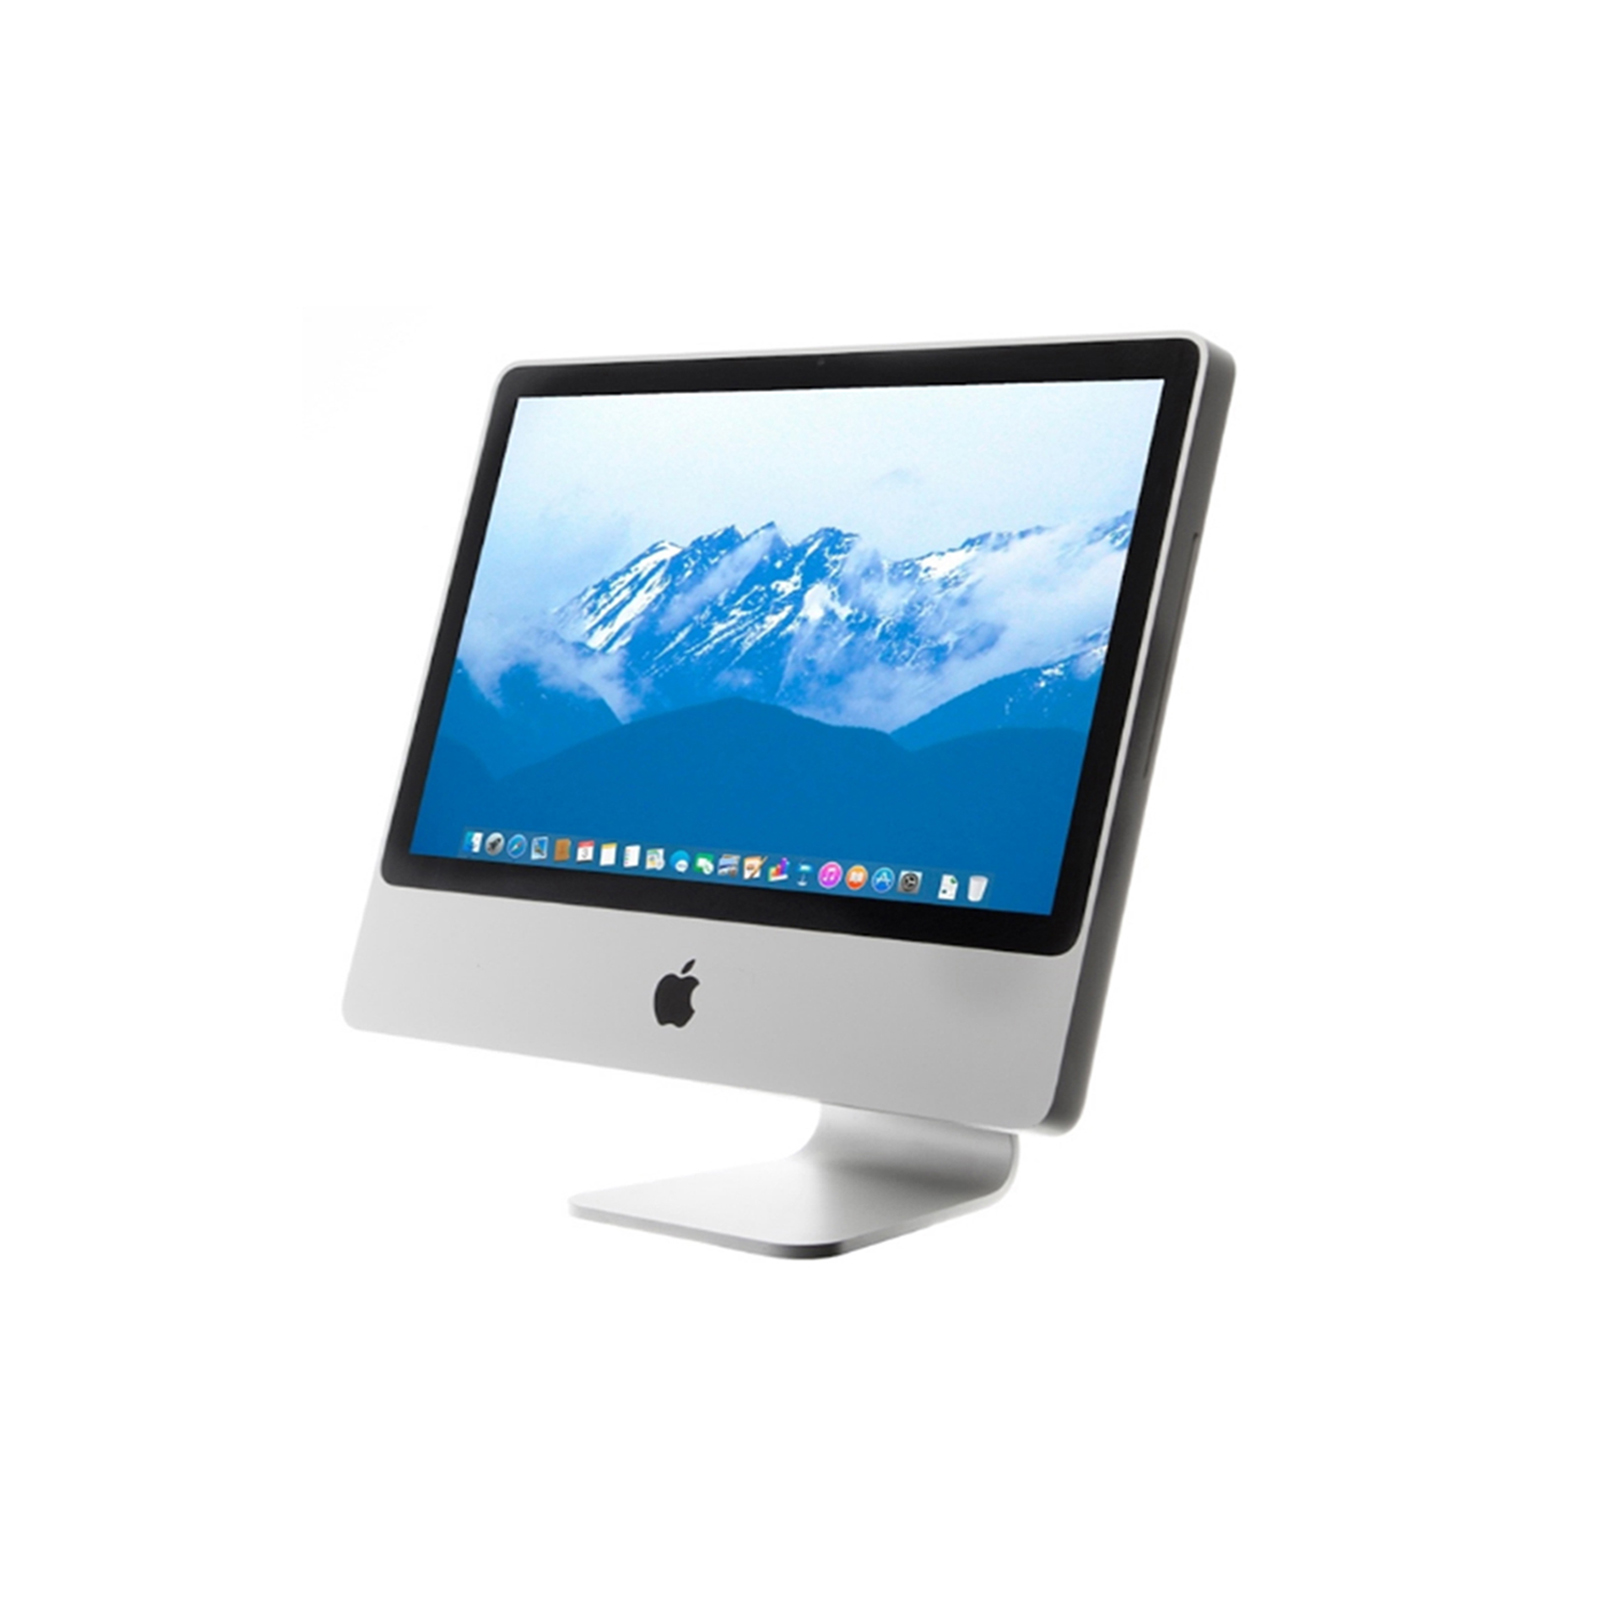 iMac 20" Mid 2009 - Excellent / Very Good / Good Condition